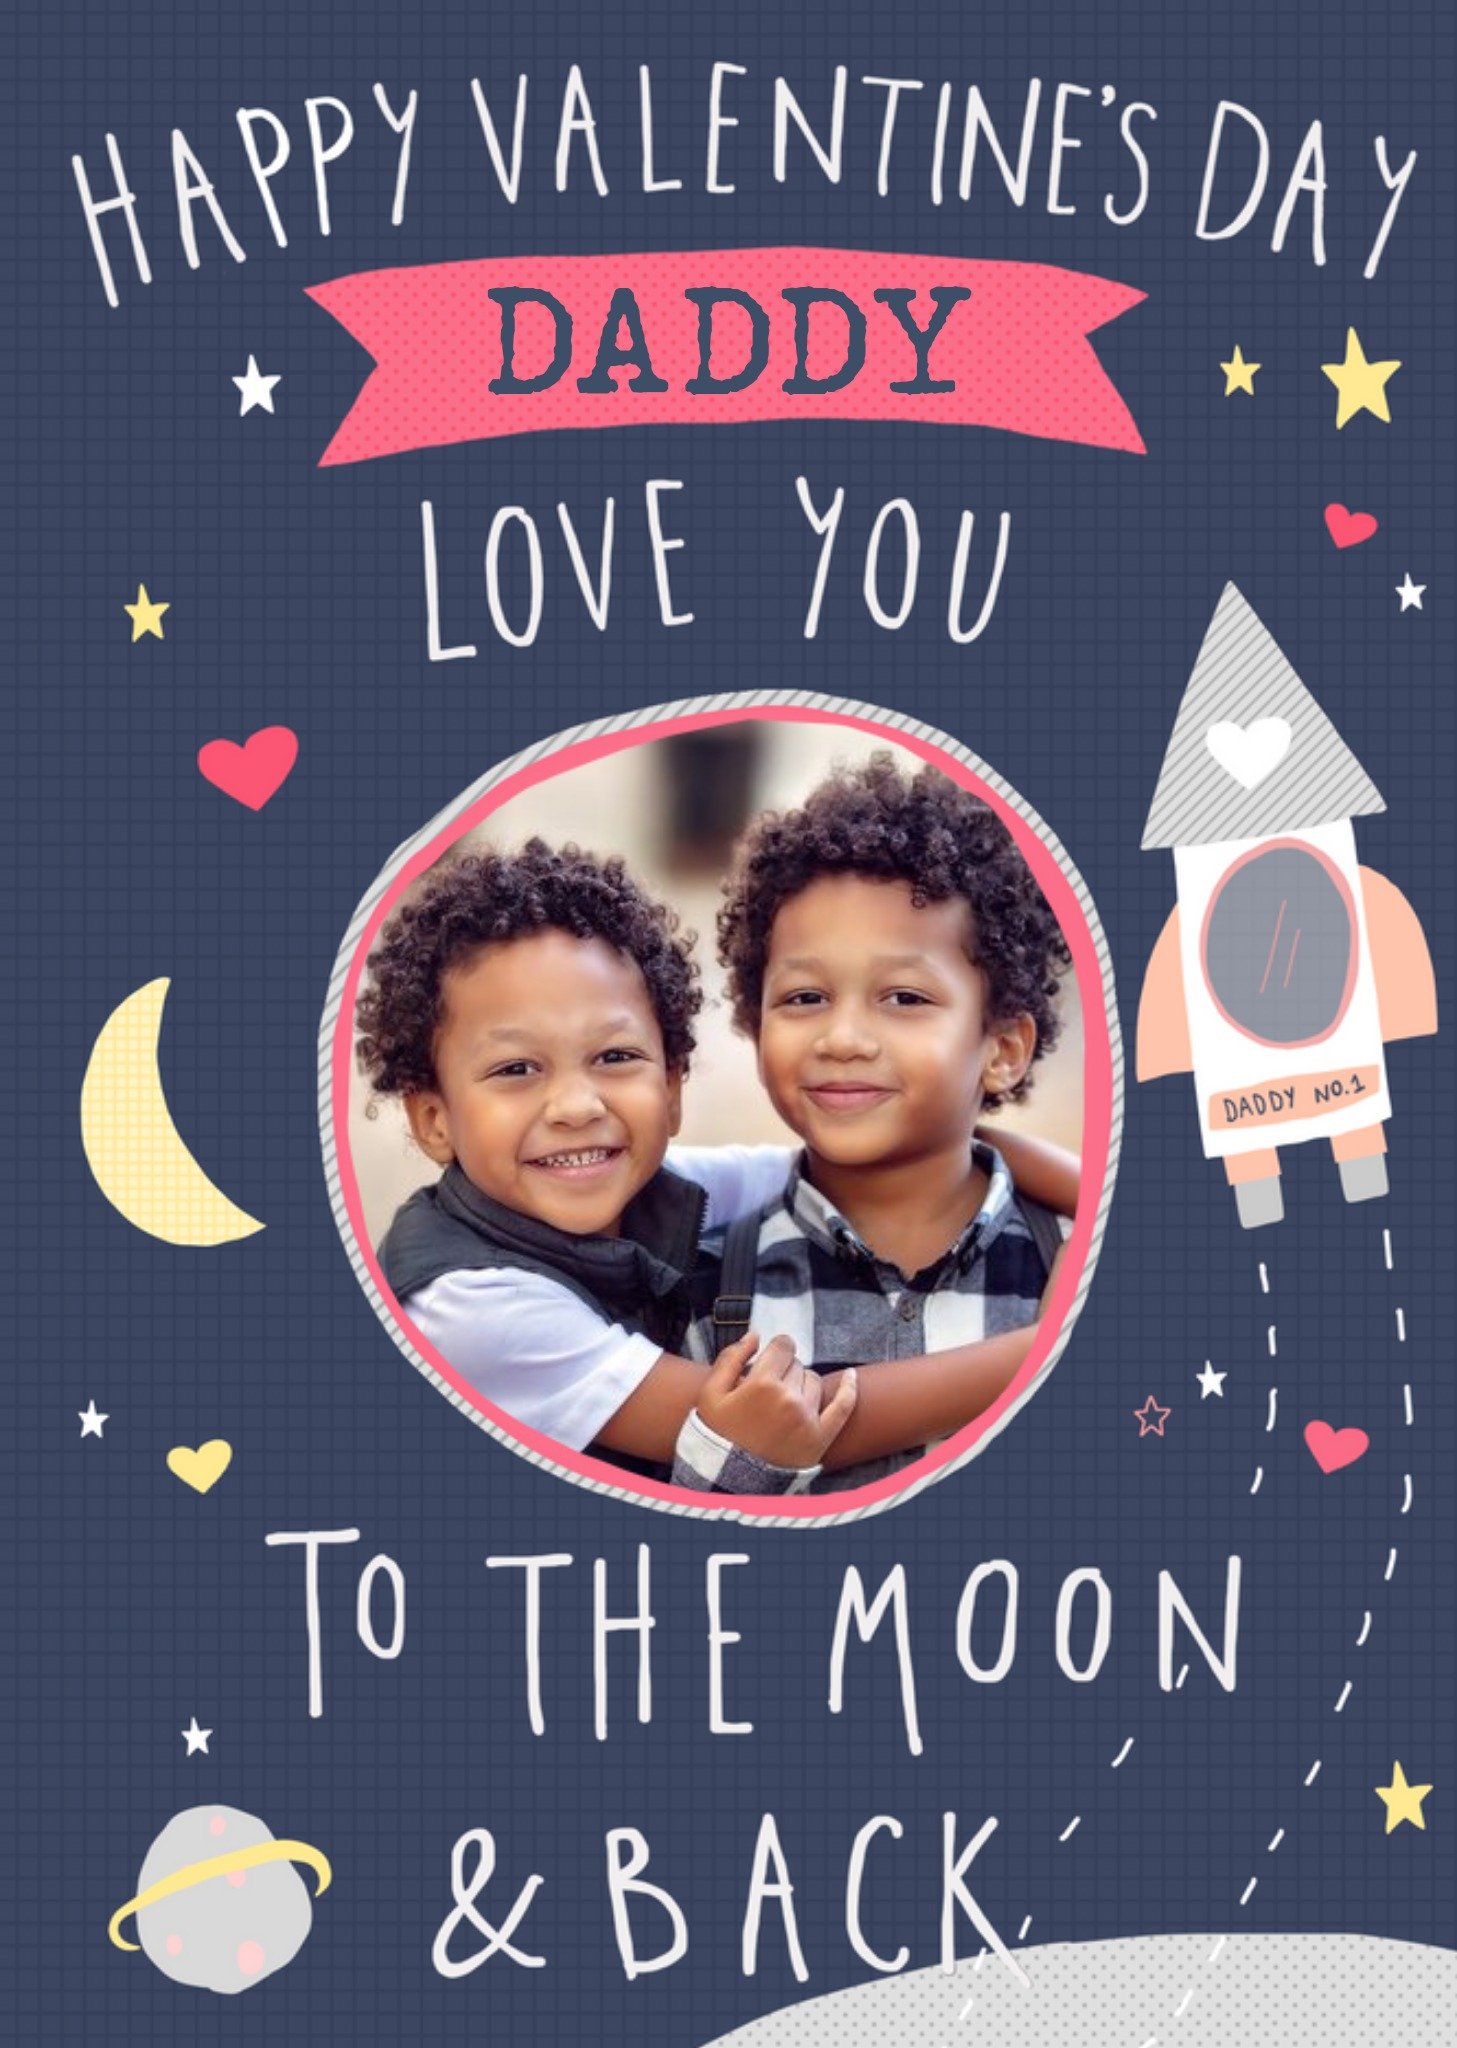 Moonpig Daddy Love You To The Moon & Back Cute Valentines Day Photo Upload Card, Large